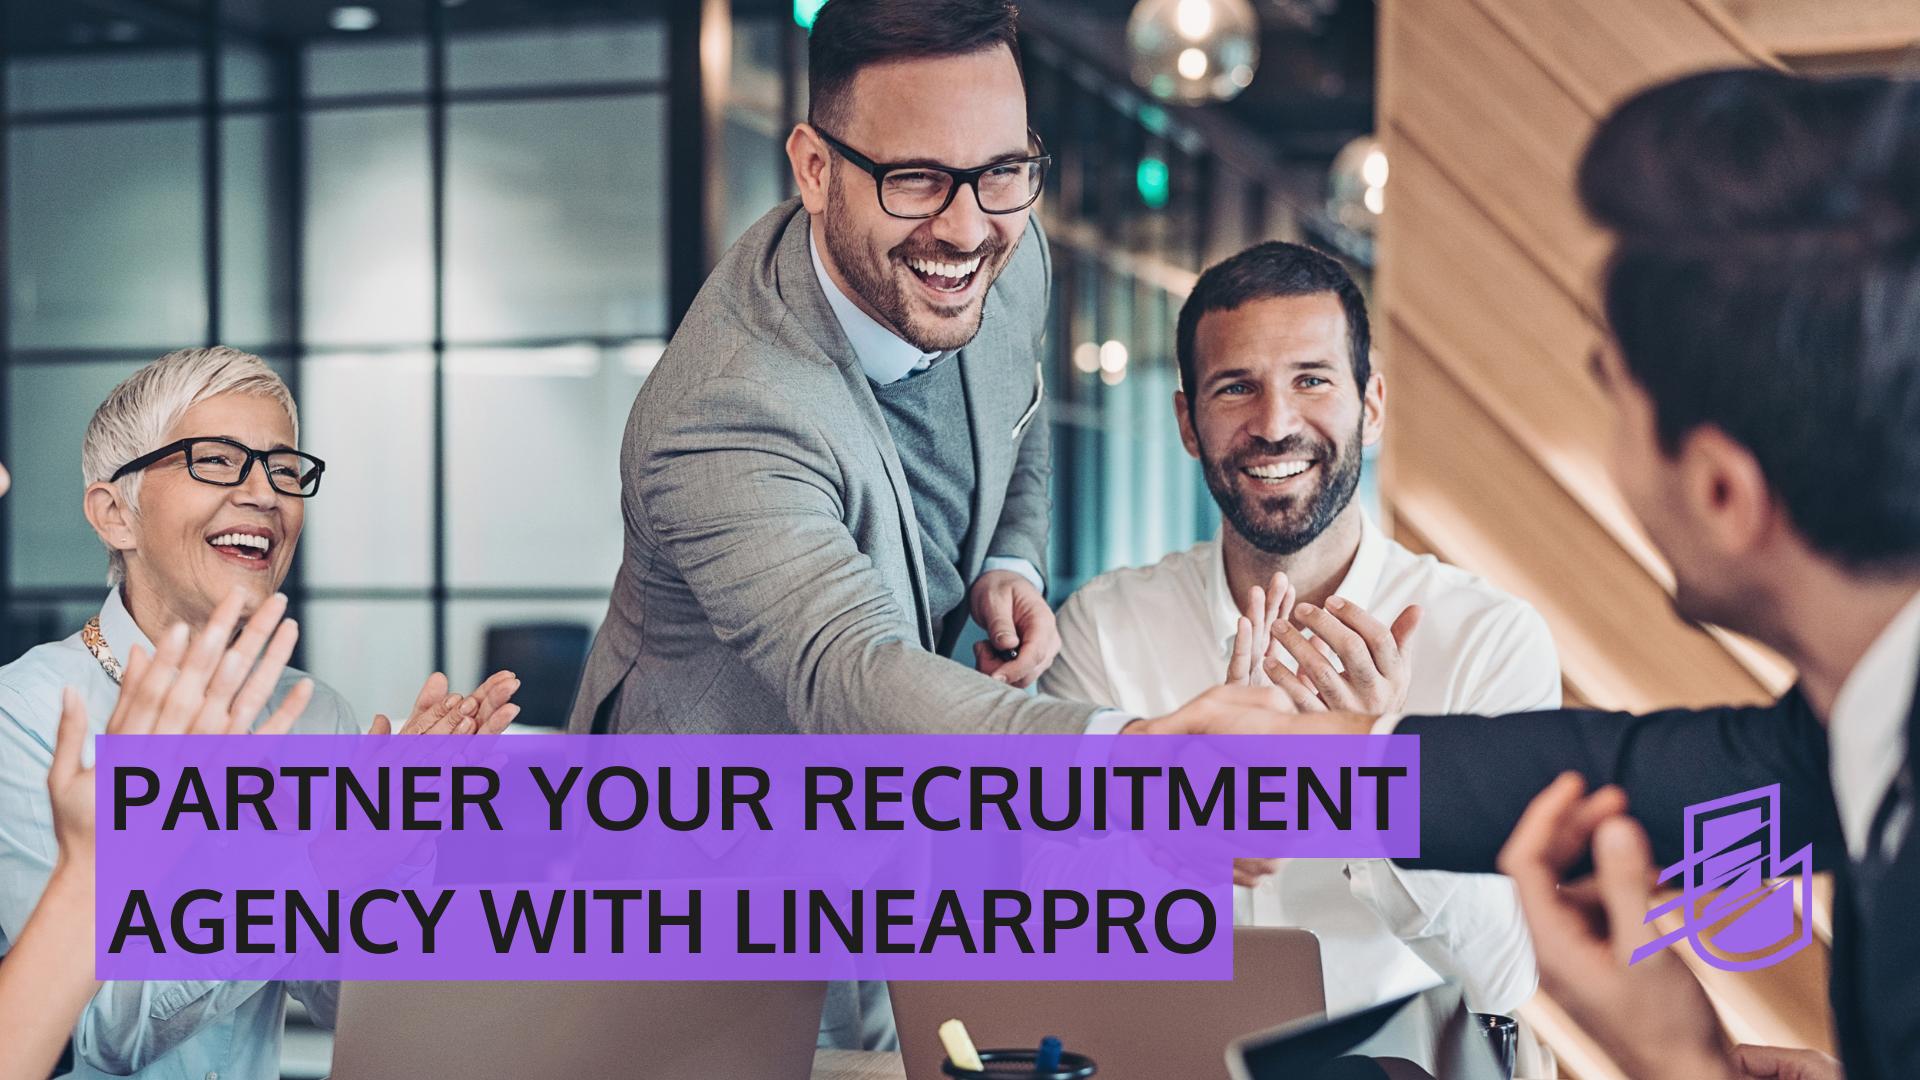 Linearpro Partner Your Recruitment Agency With Linearpro